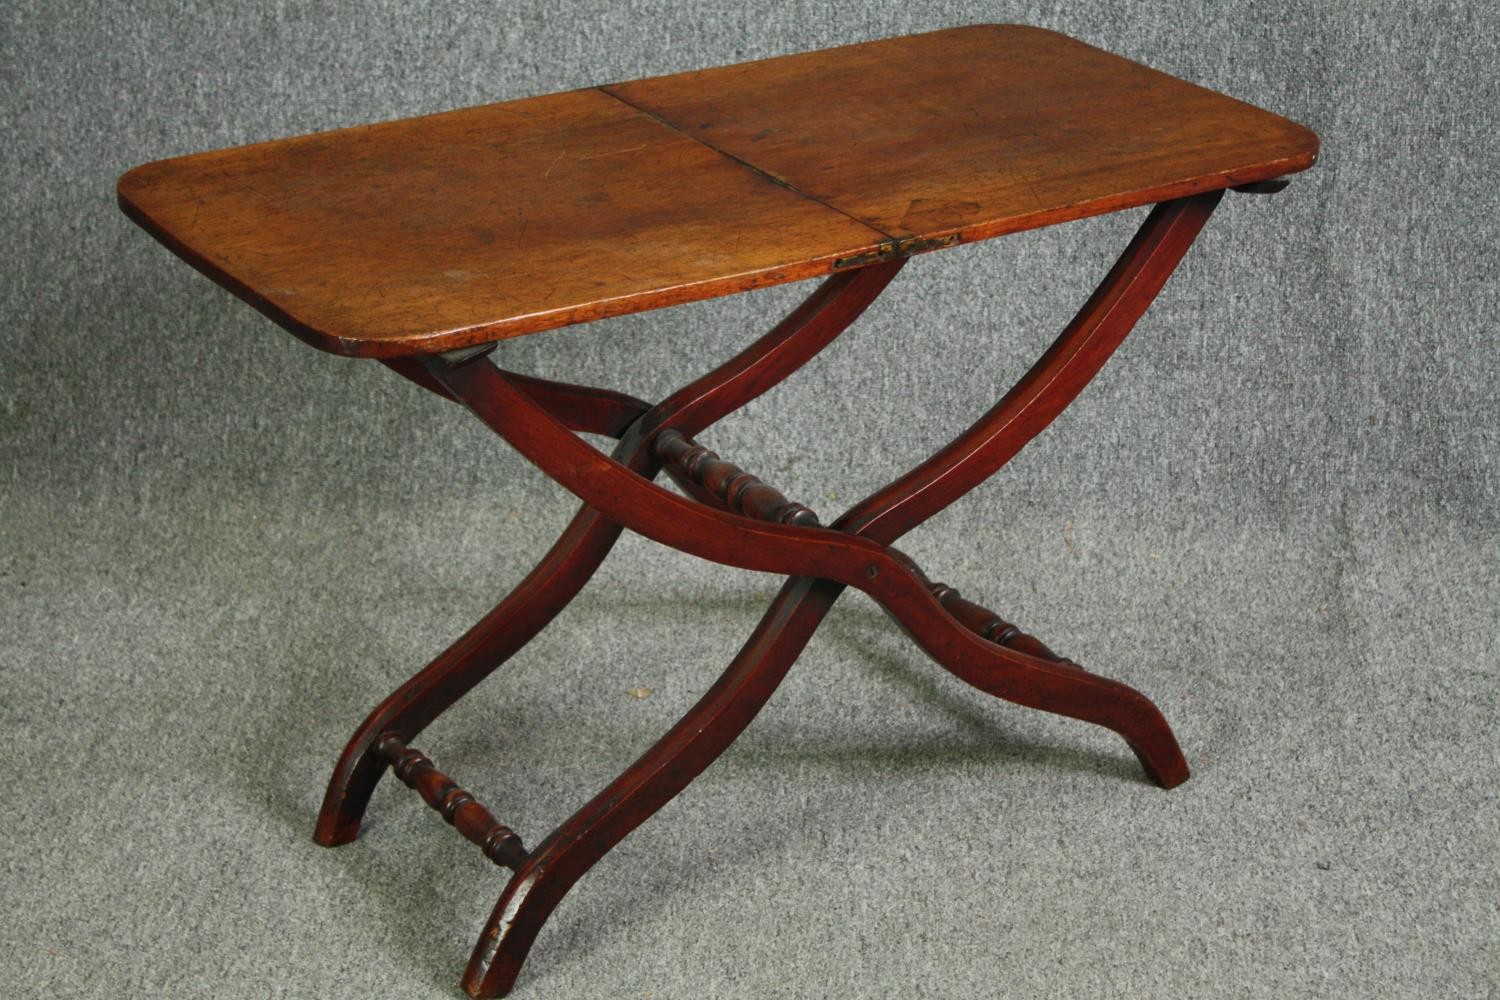 A 19th century mahogany folding campaign table, later adapted to a fixed top. H.59 W.91 W.45cm. - Image 2 of 7